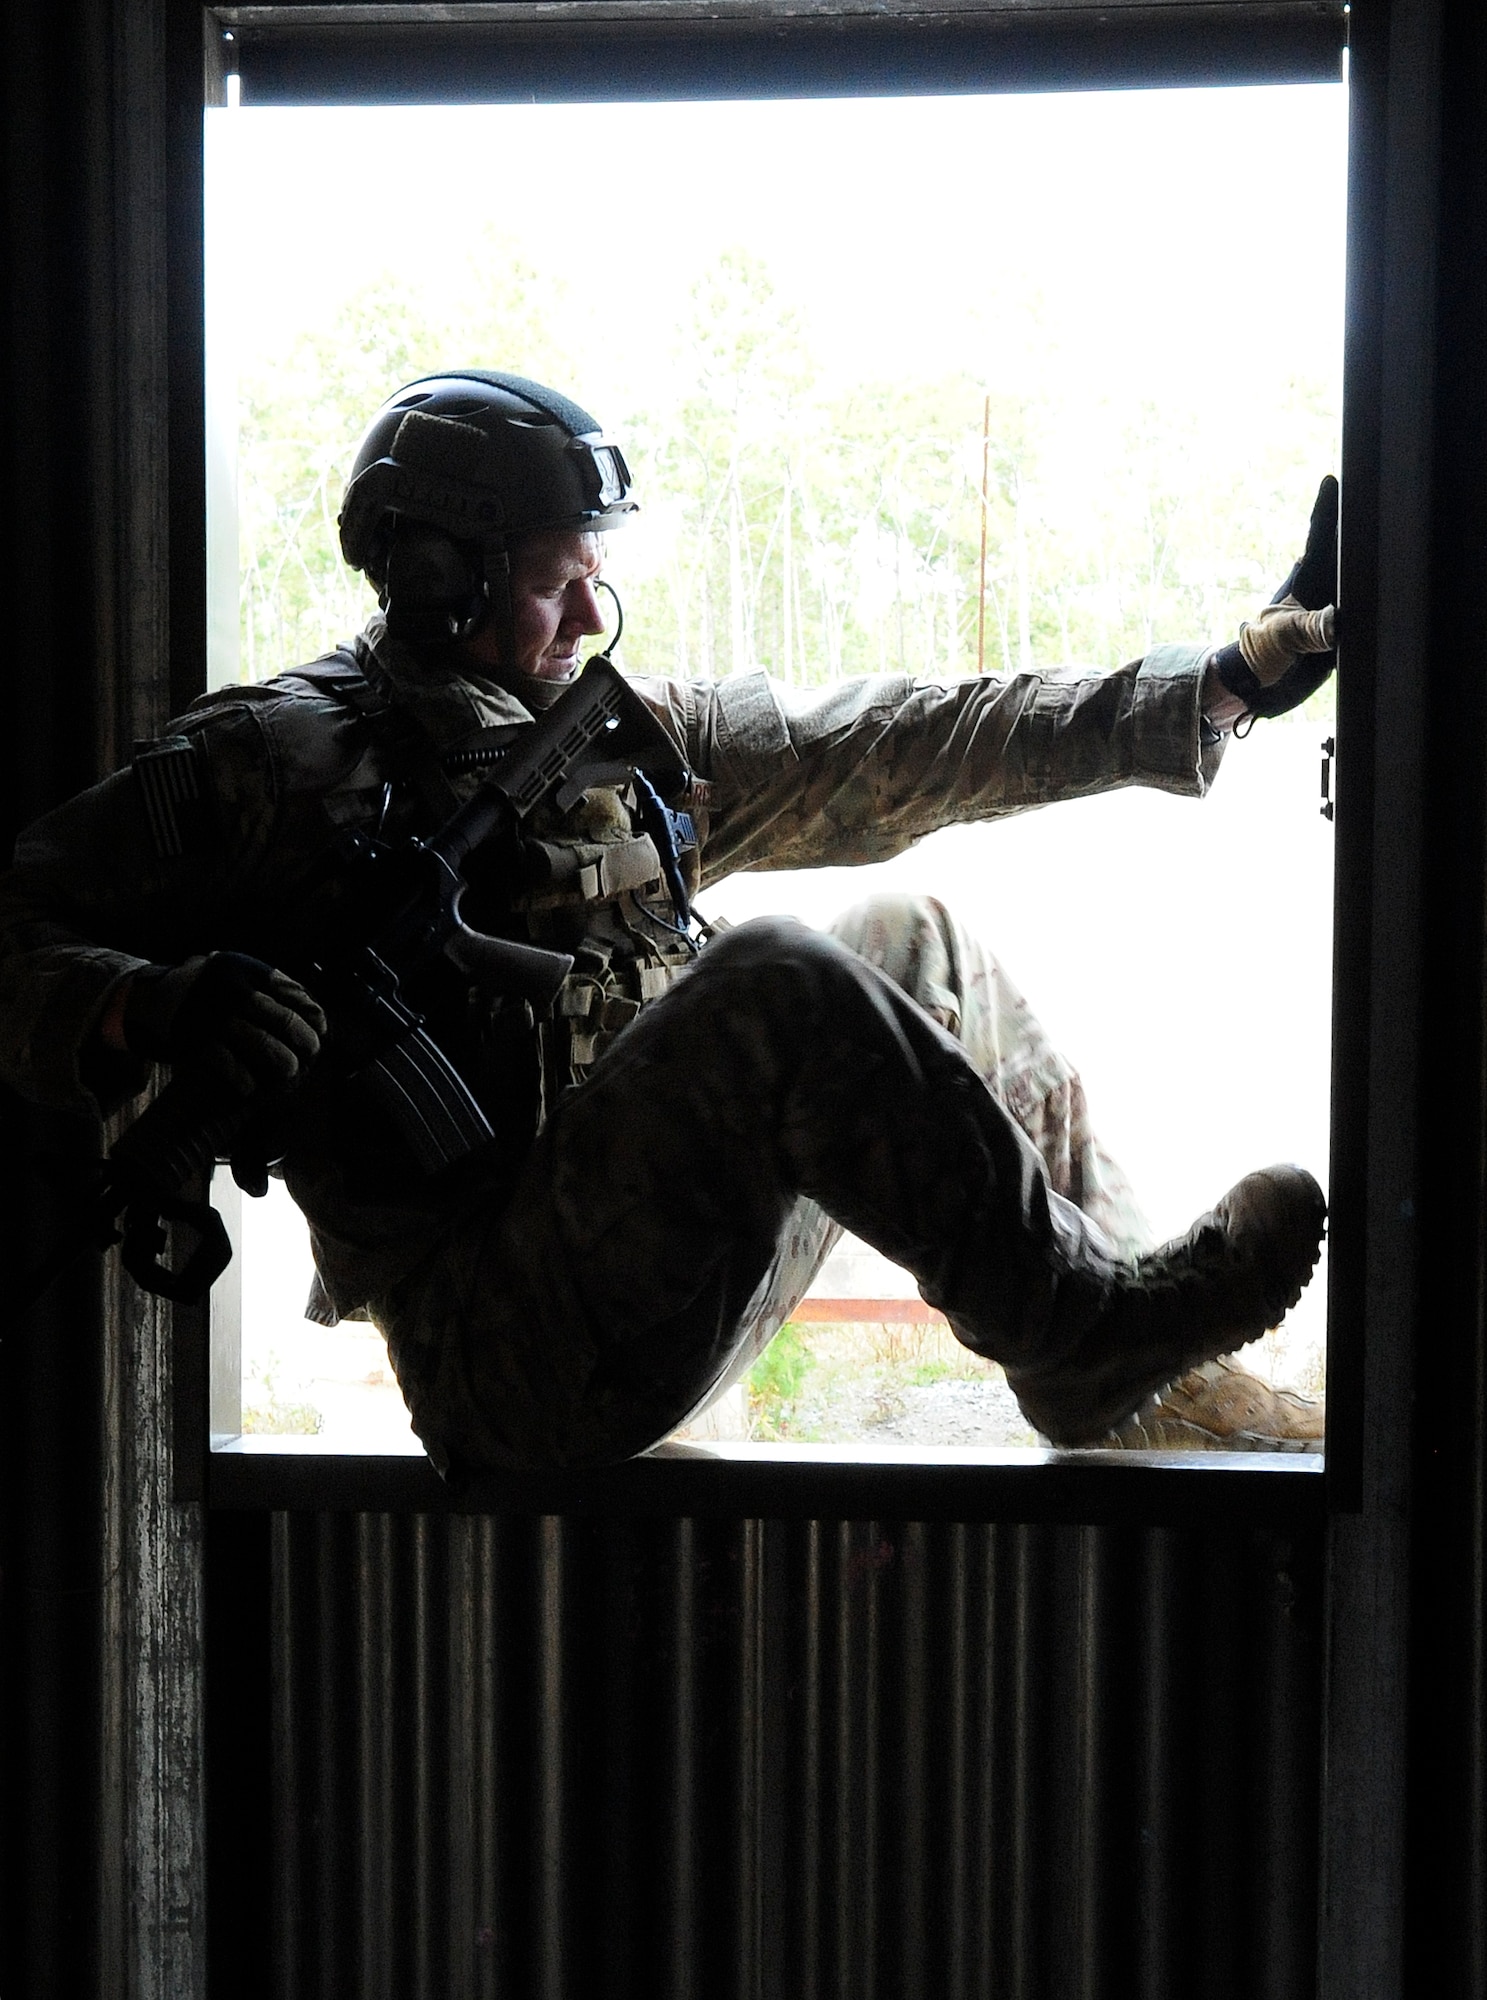 Staff Sgt. Kenneth Paxon, 1st Special Operations Support Squadron Survival, Evasion, Resistance and Escape Specialist, demonstrates how to climb out a window at B-76 Urban Training Area, Eglin Range, Fla., Nov. 5, 2014. It is important for Air Commandos to know how to enter and exit a building using different means, especially in an urban environment. (U.S. Air Force photo/Airman 1st Class Andrea Posey)